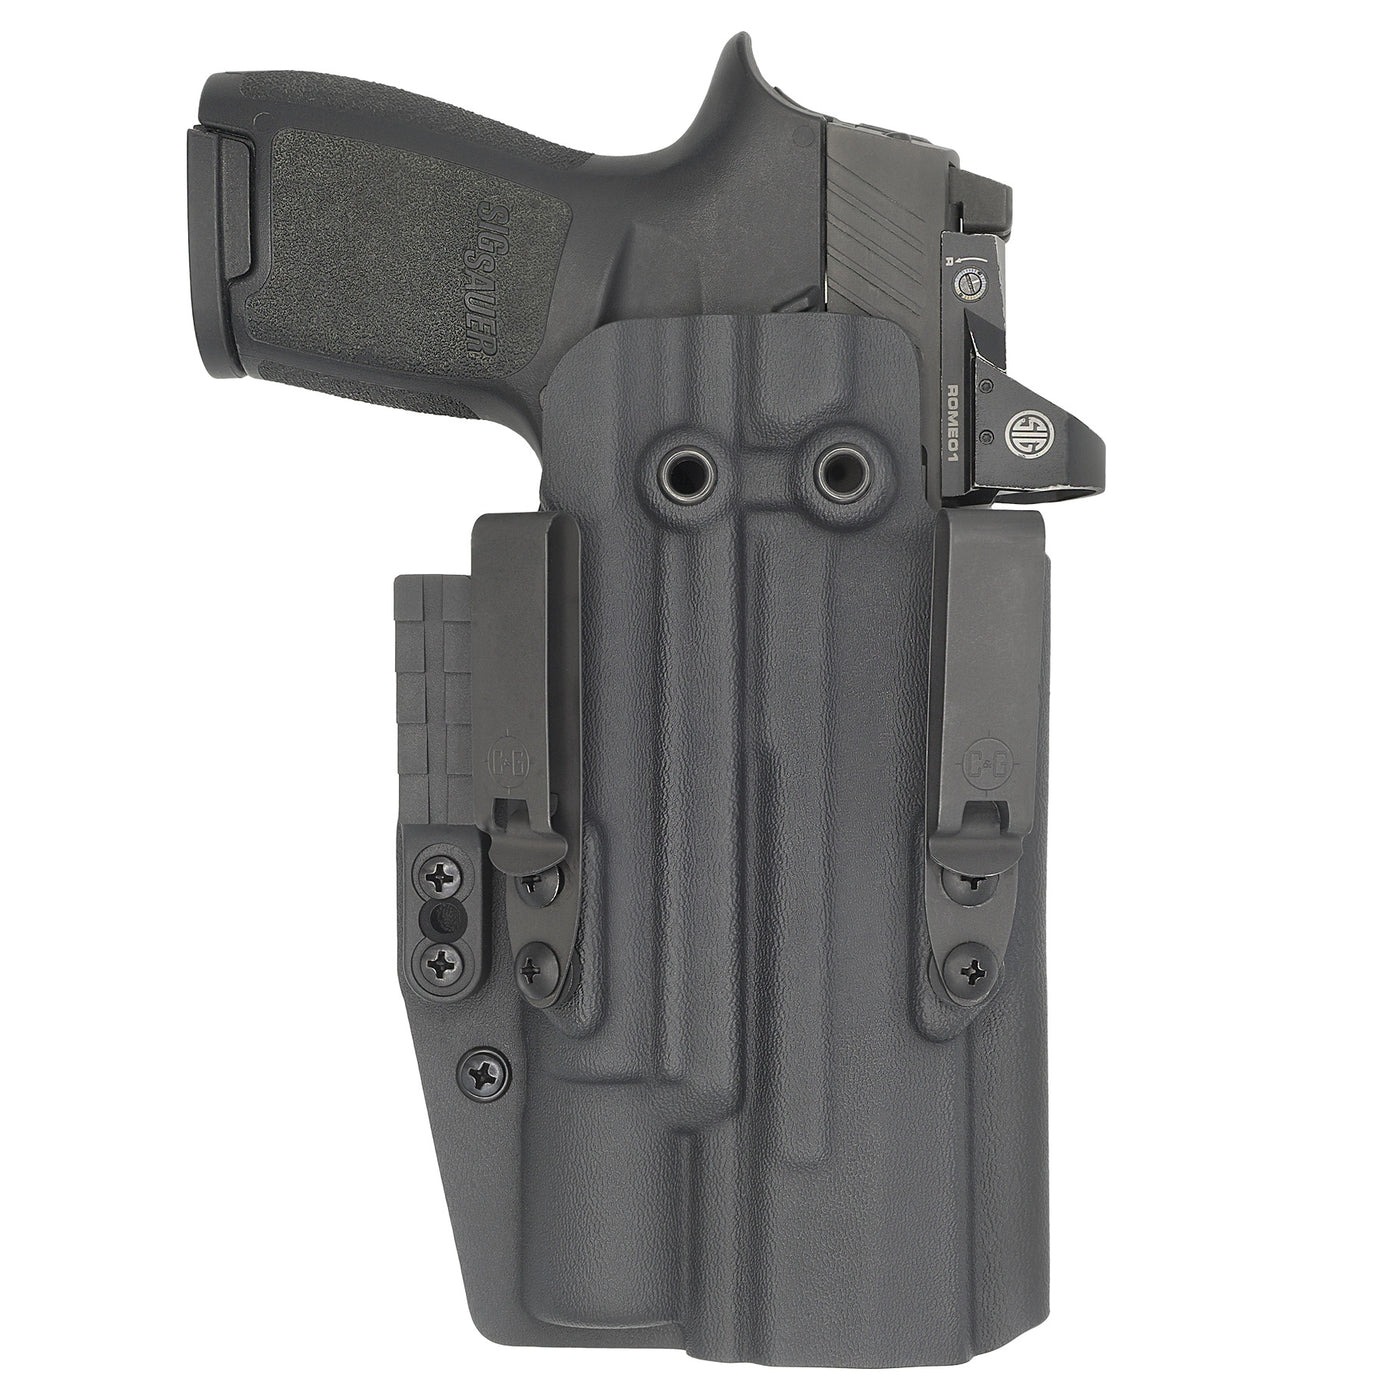 C&G Holsters Quickship IWB ALPHA UPGRADE Tactical SIG P320/X5 Surefire X300 holster in holstered position